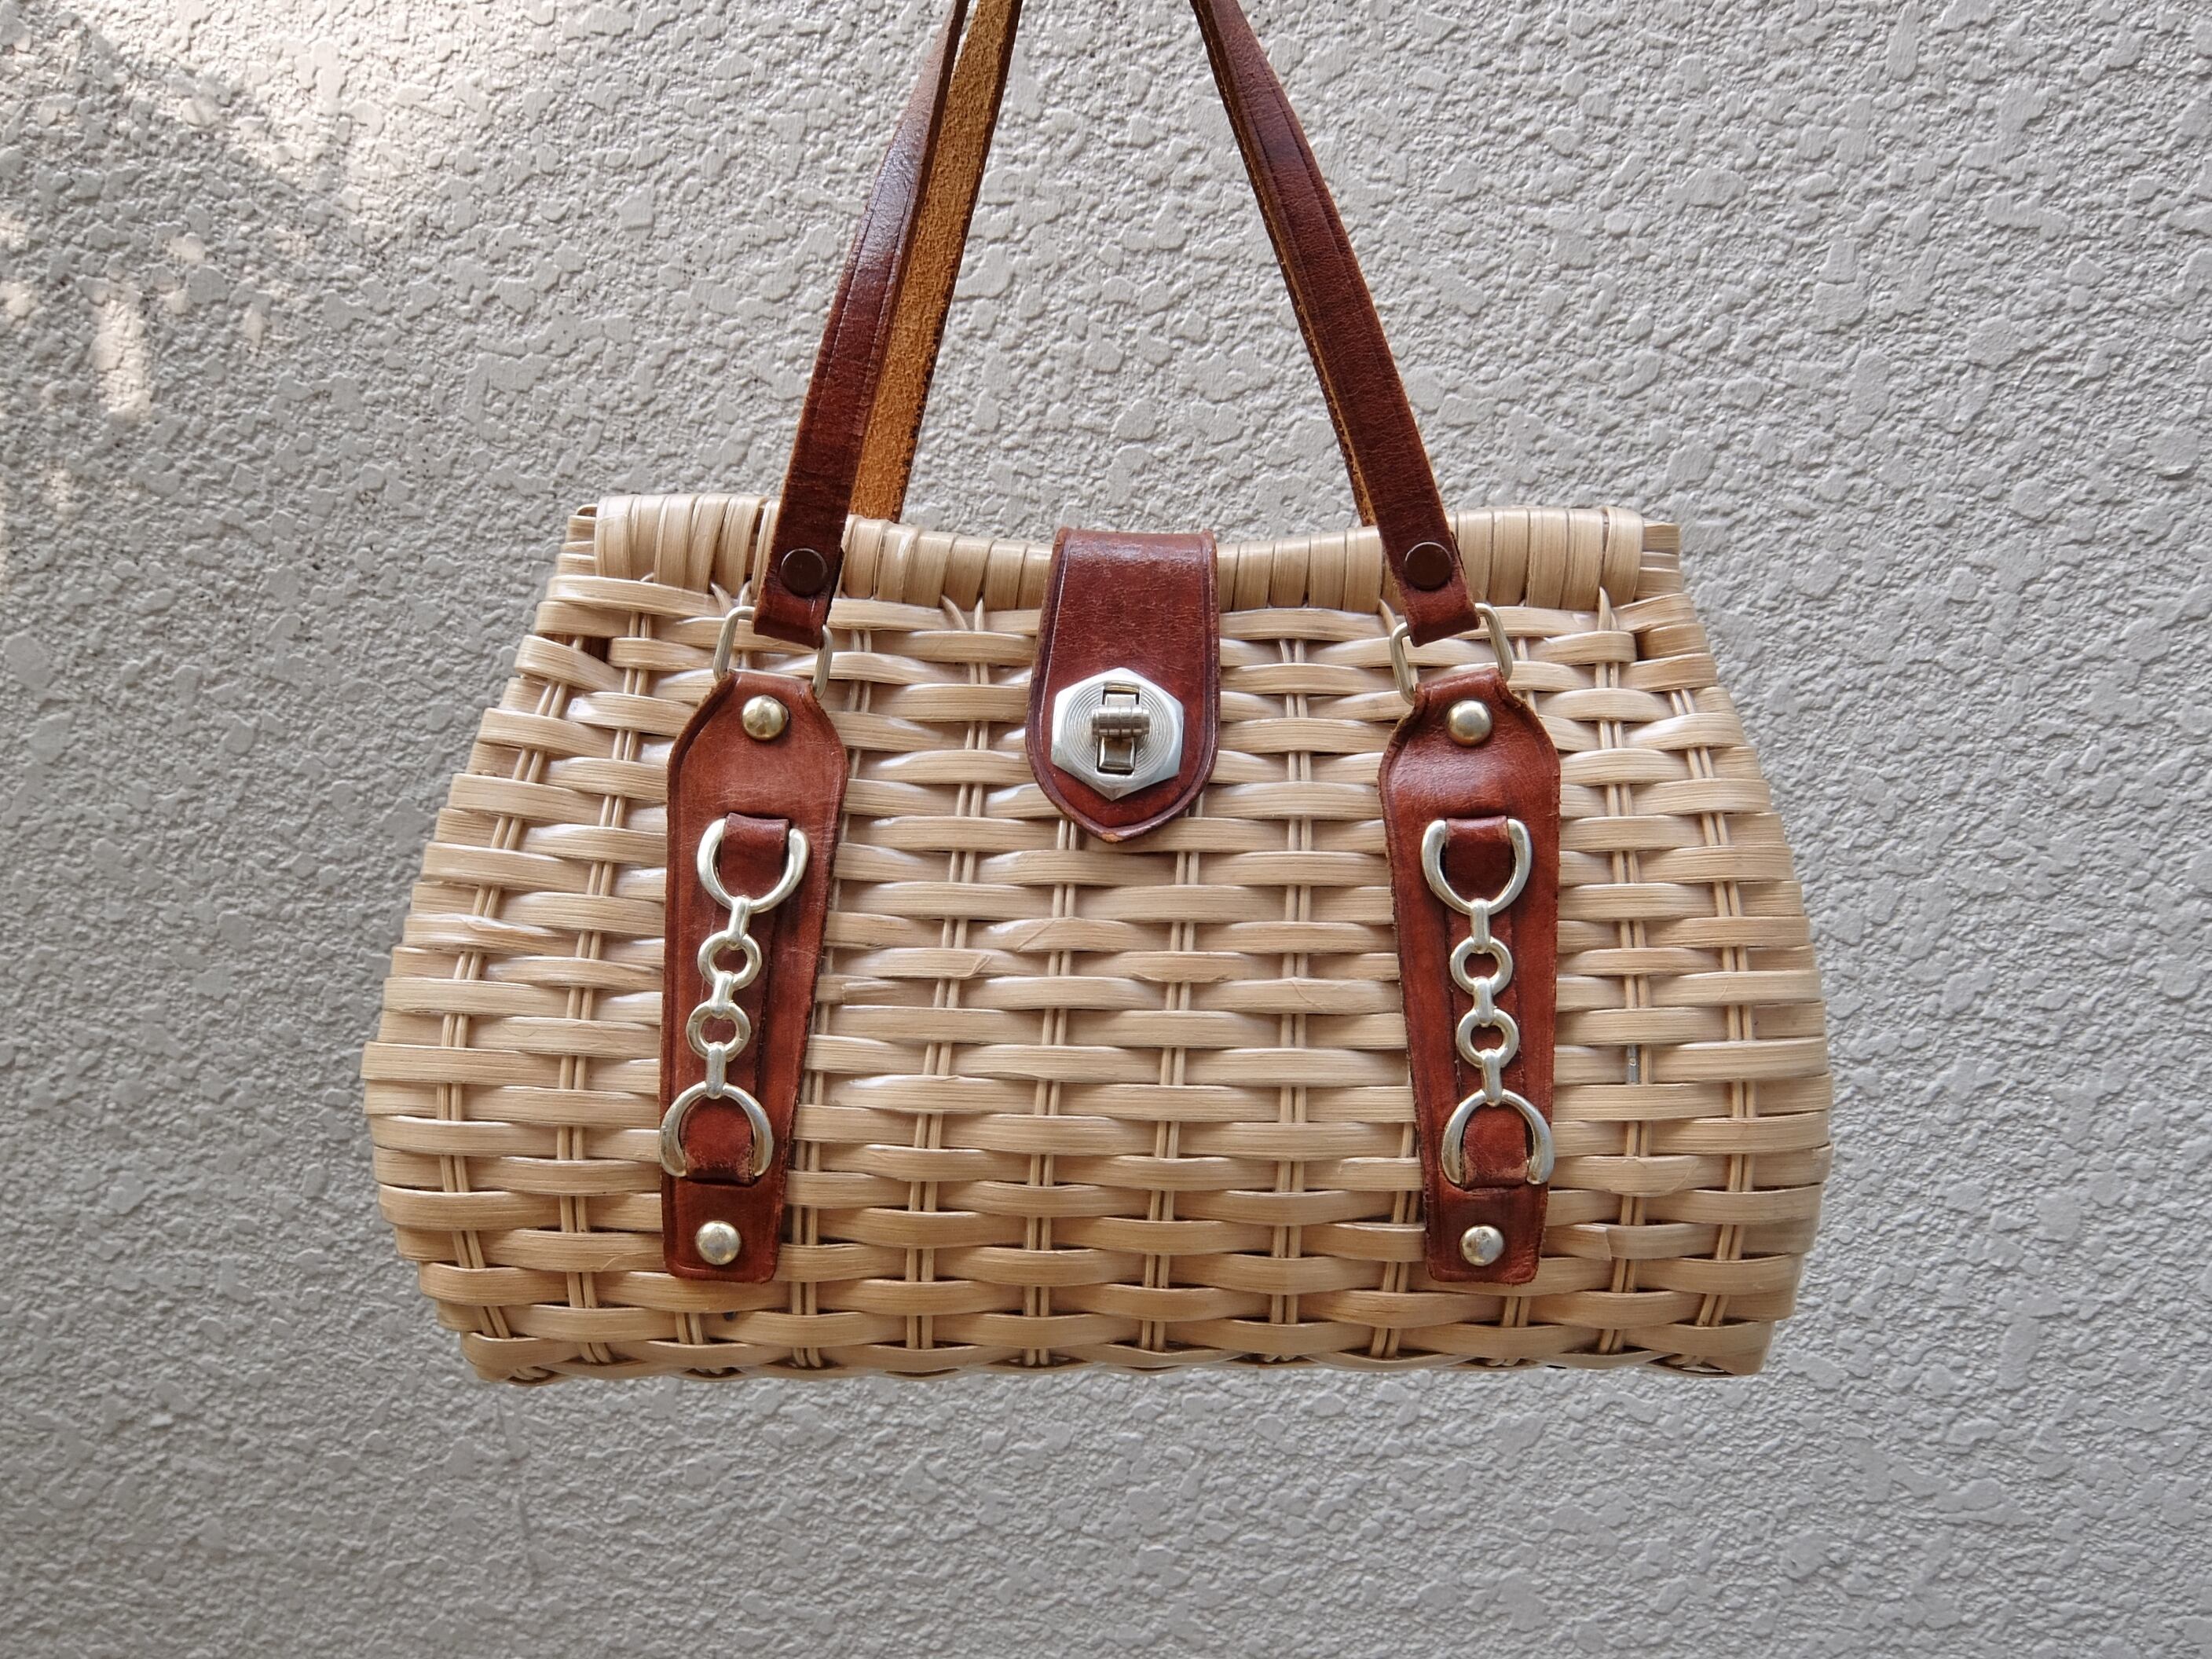 50-60's Rattan bag／50-60年代 ラタン バッグ | BIG TIME ｜ヴィンテージ 古着 BIGTIME（ビッグタイム）  powered by BASE